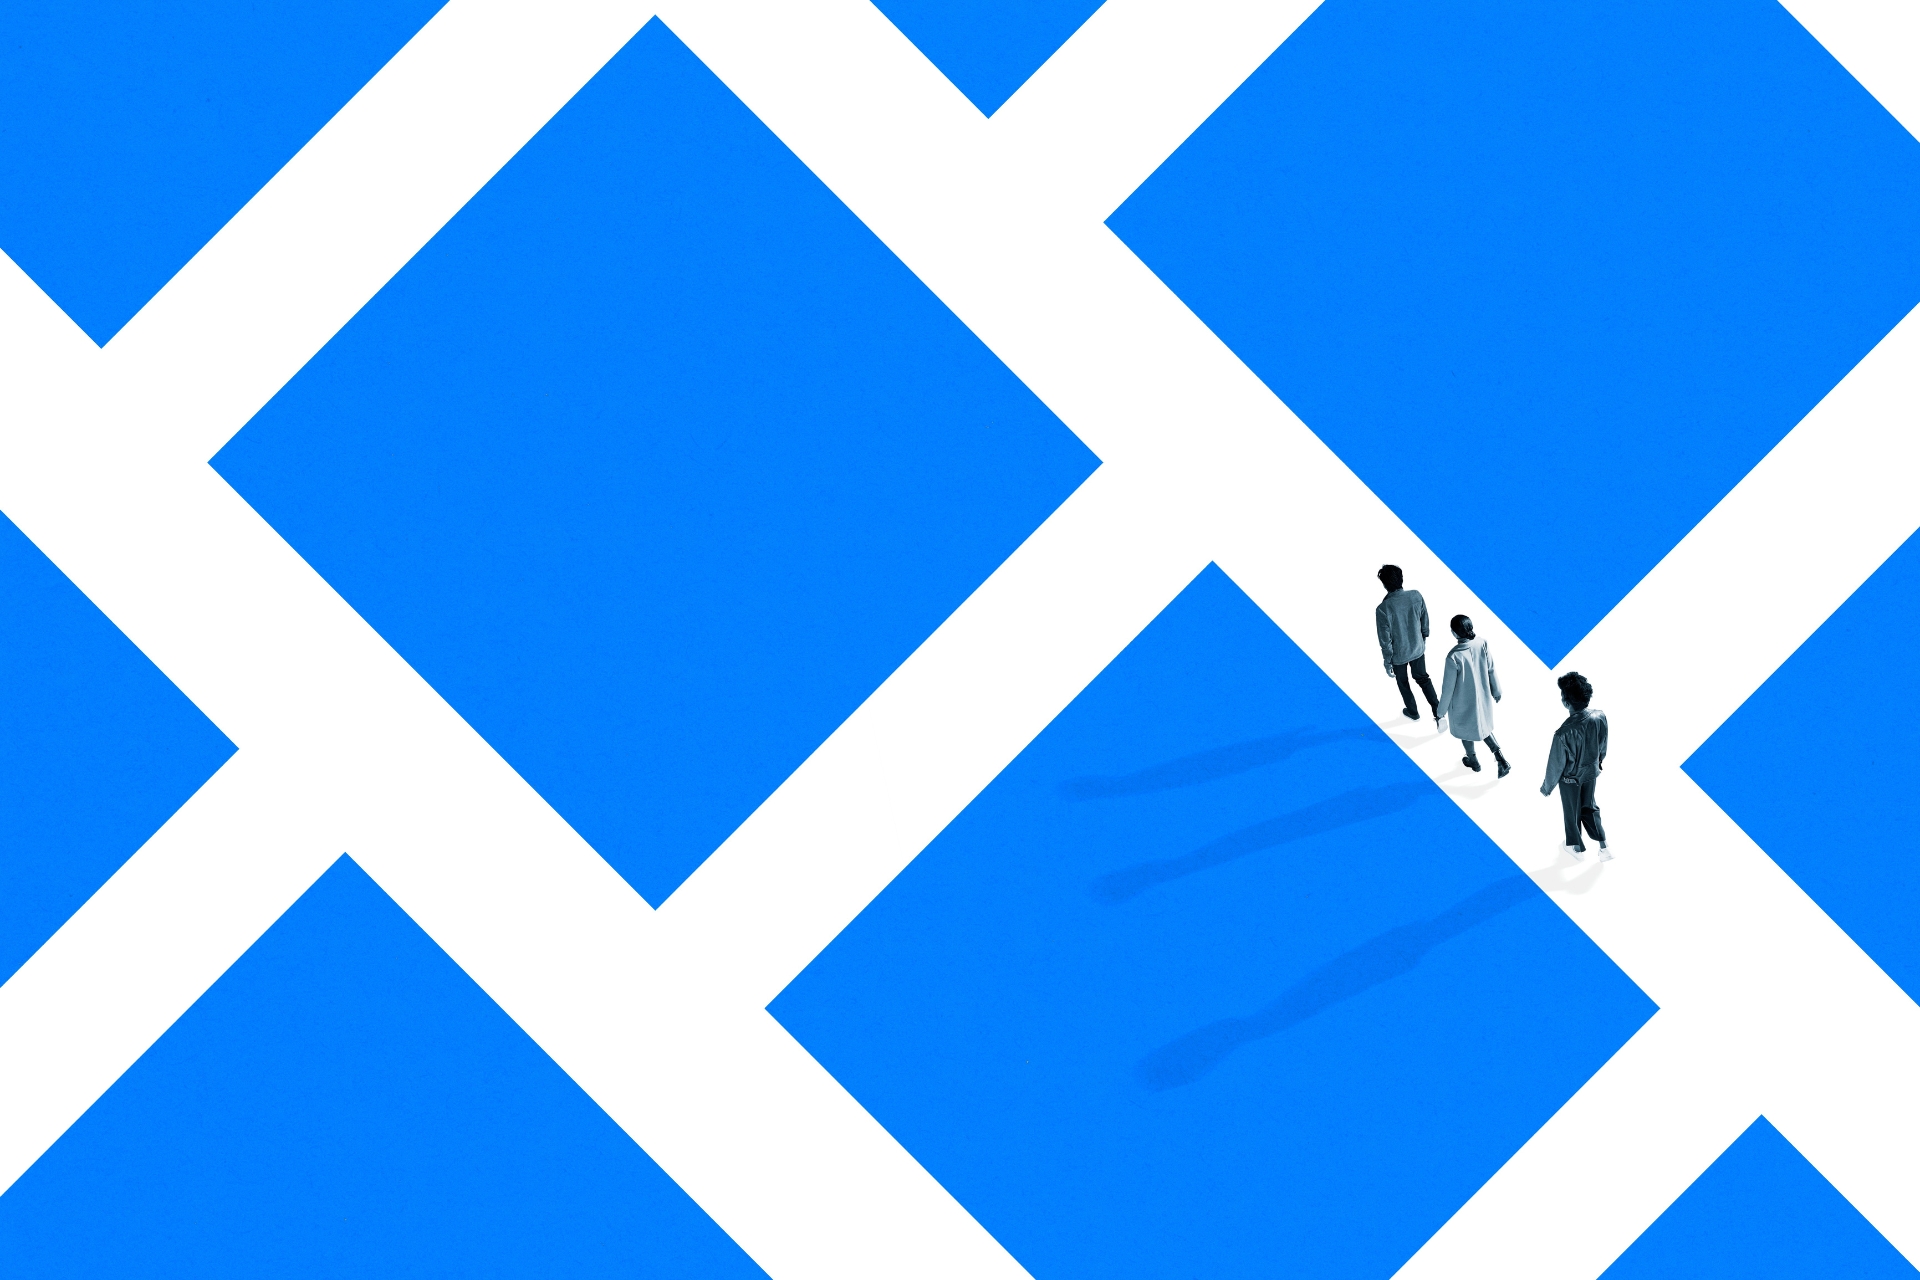 Three young adults walking through a maze of blue blocks.